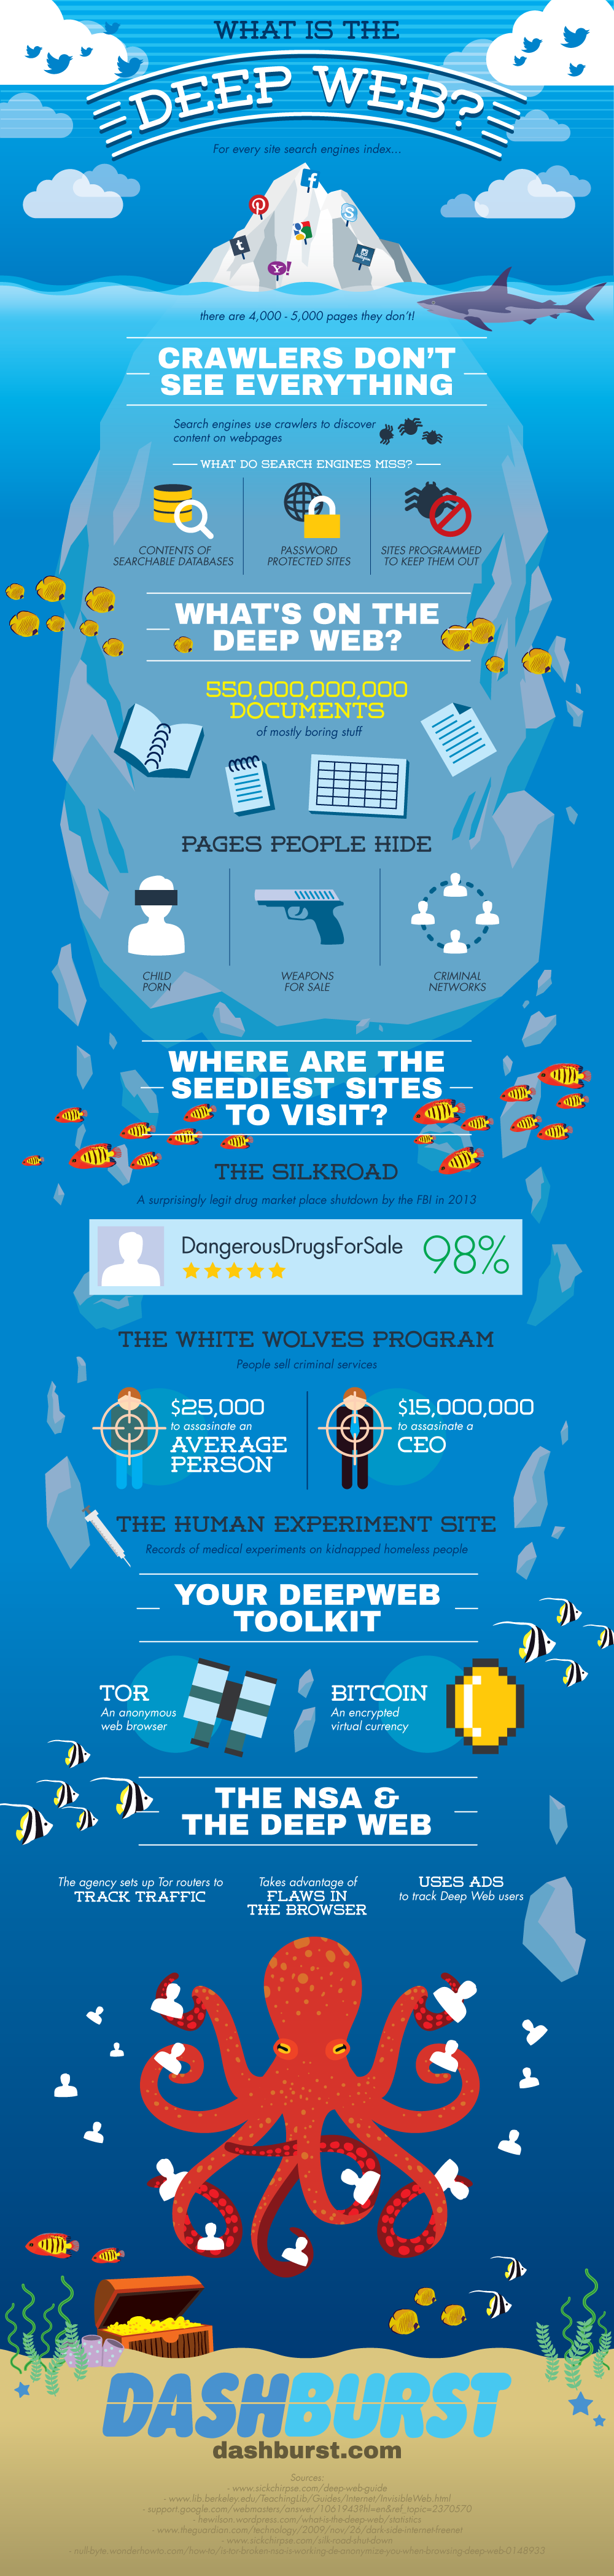 What Is the Deep Web? [INFOGRAPHIC]